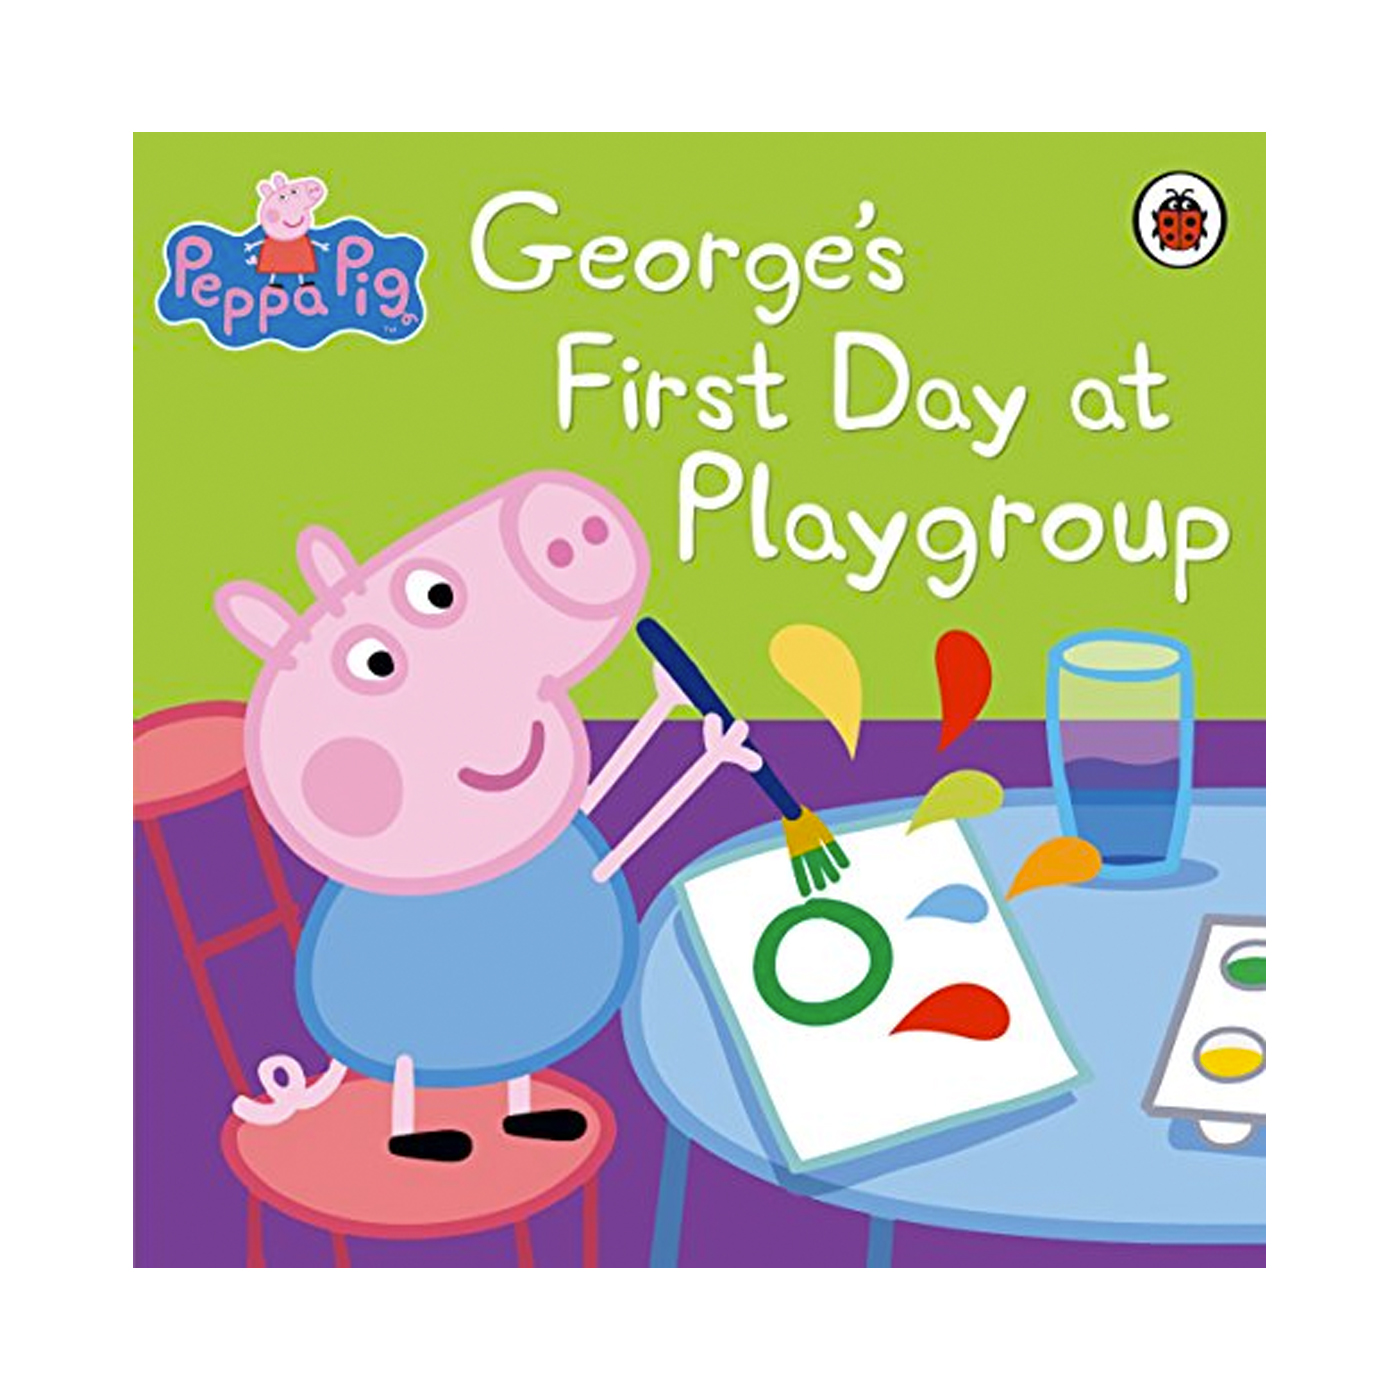  Peppa Pig: Georges First Day At Playgroup